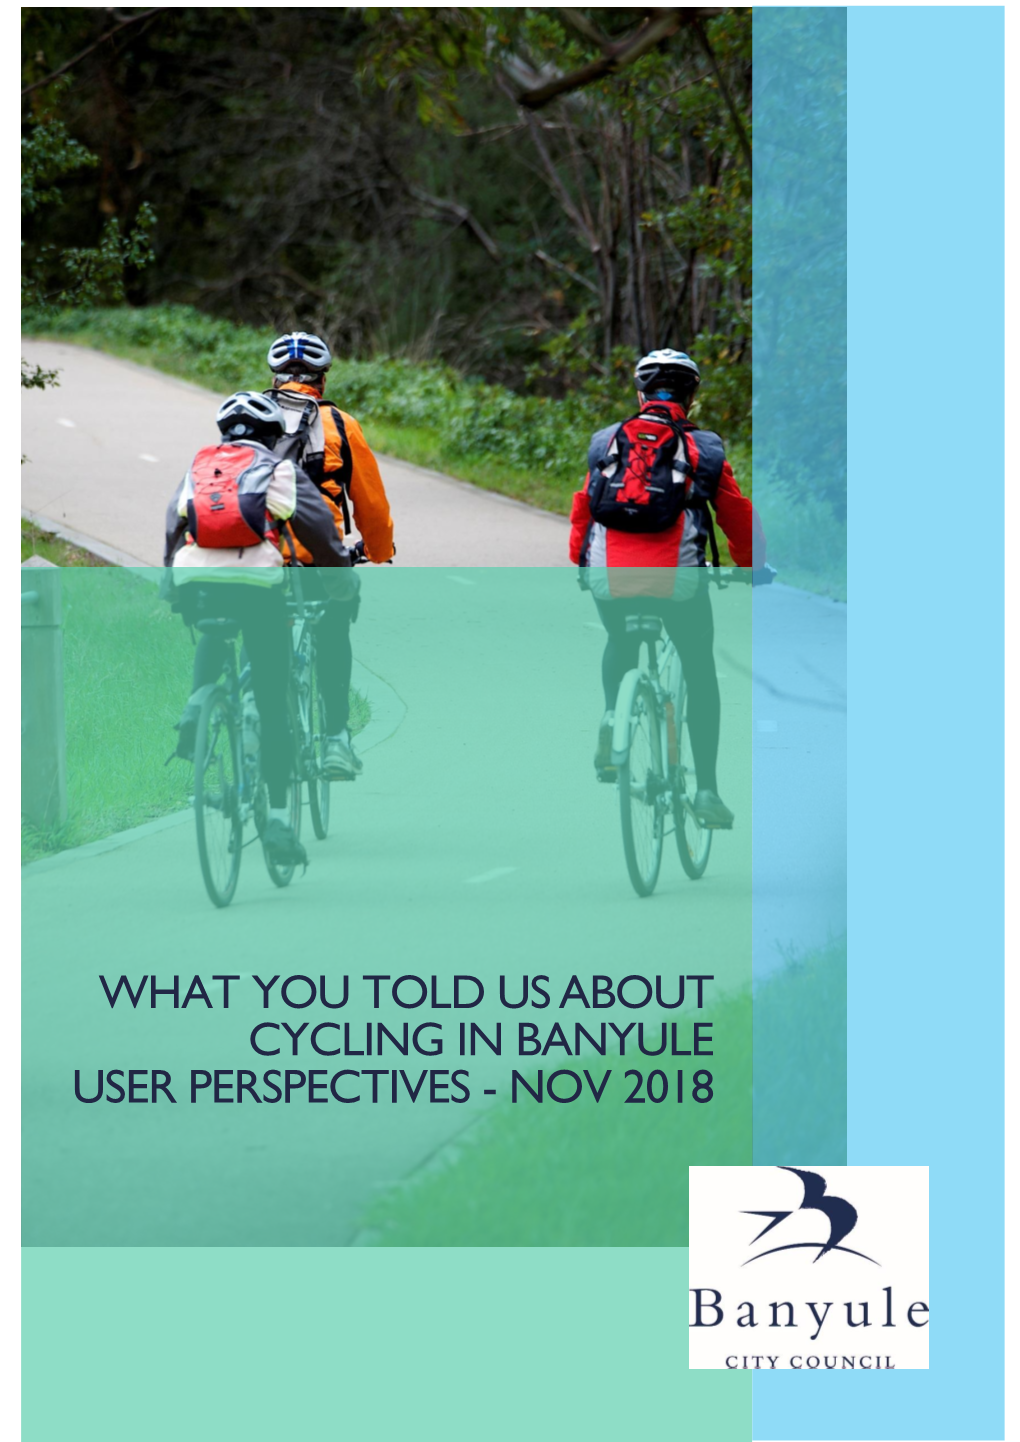 What You Told Usabout Cycling in Banyule User Perspectives